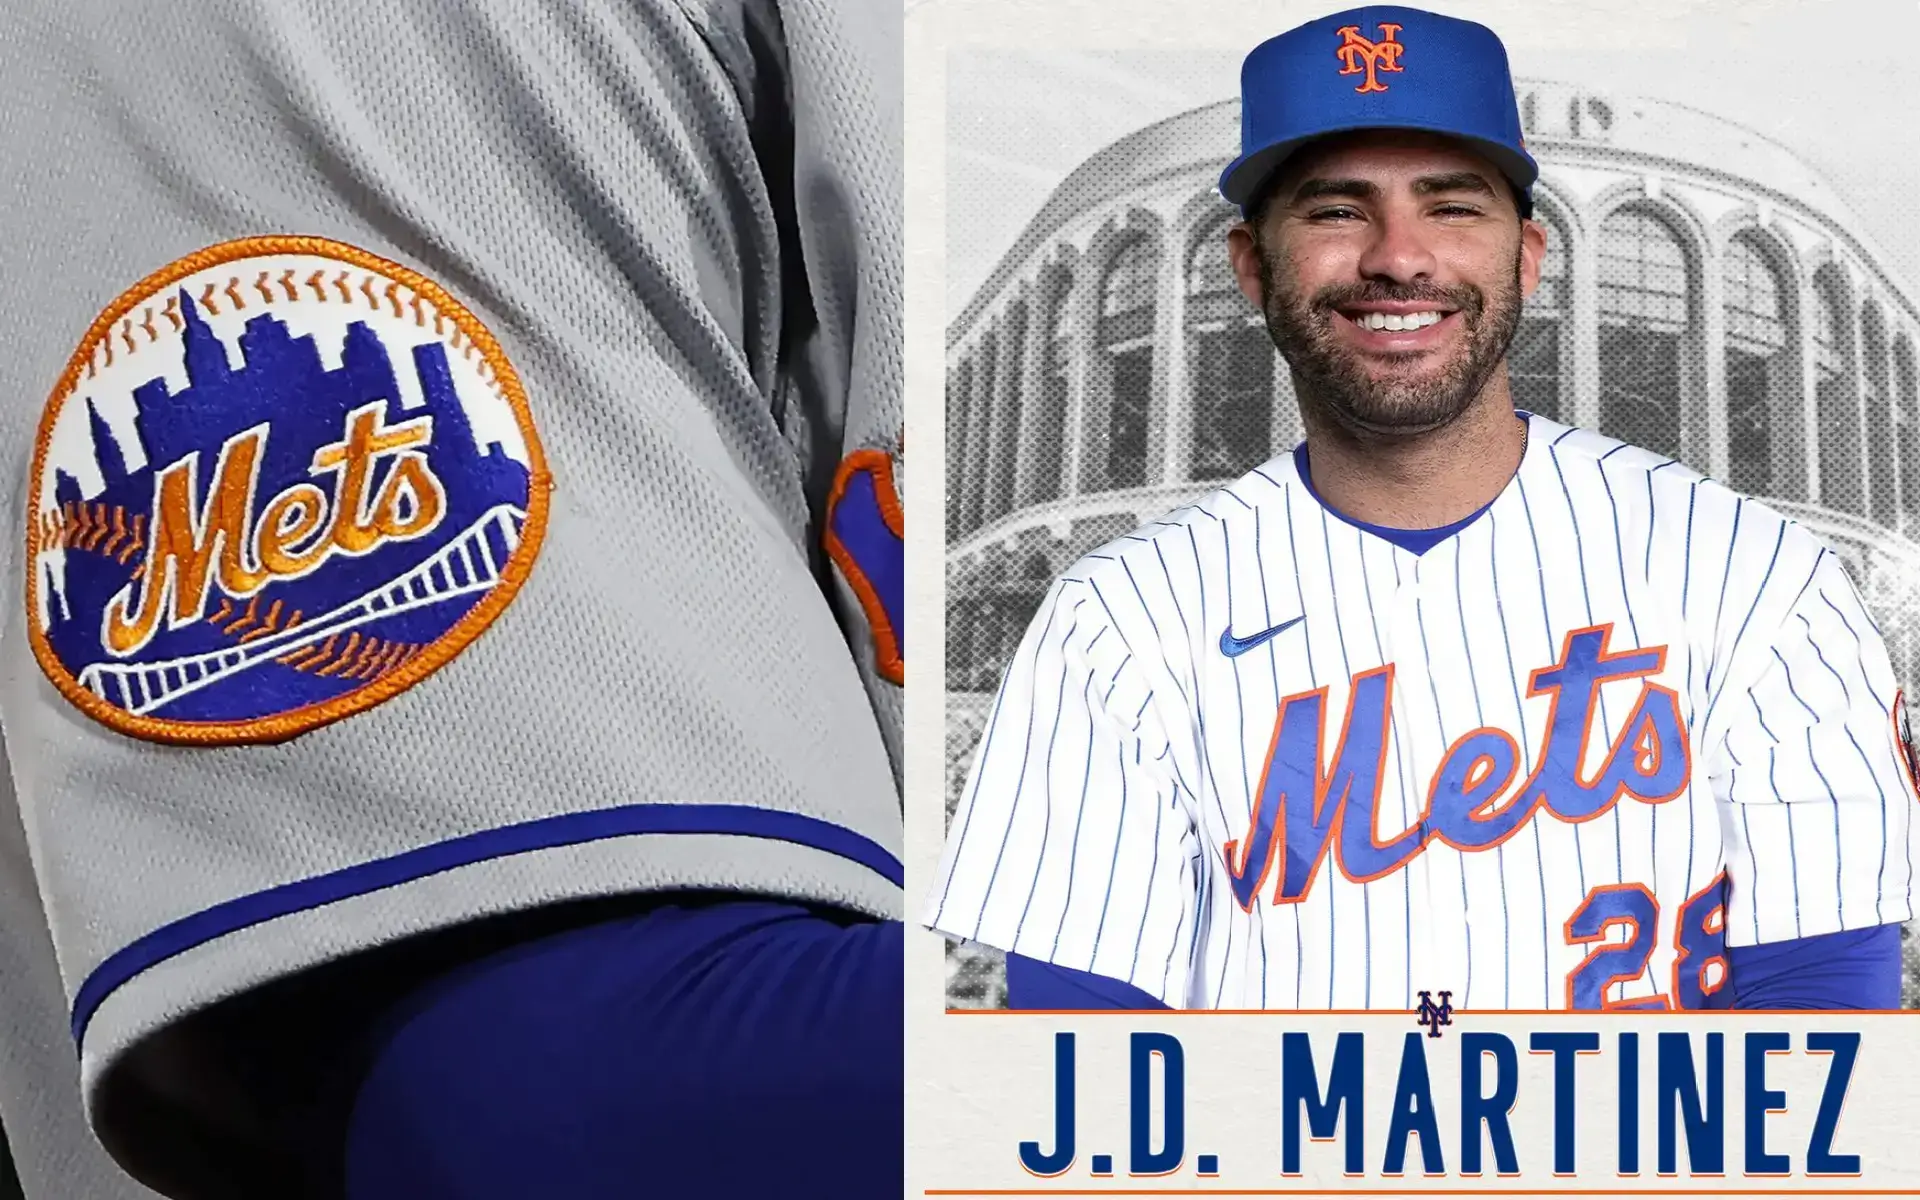 J.D. Martinez Joins Mets on a Million Dollar Contract